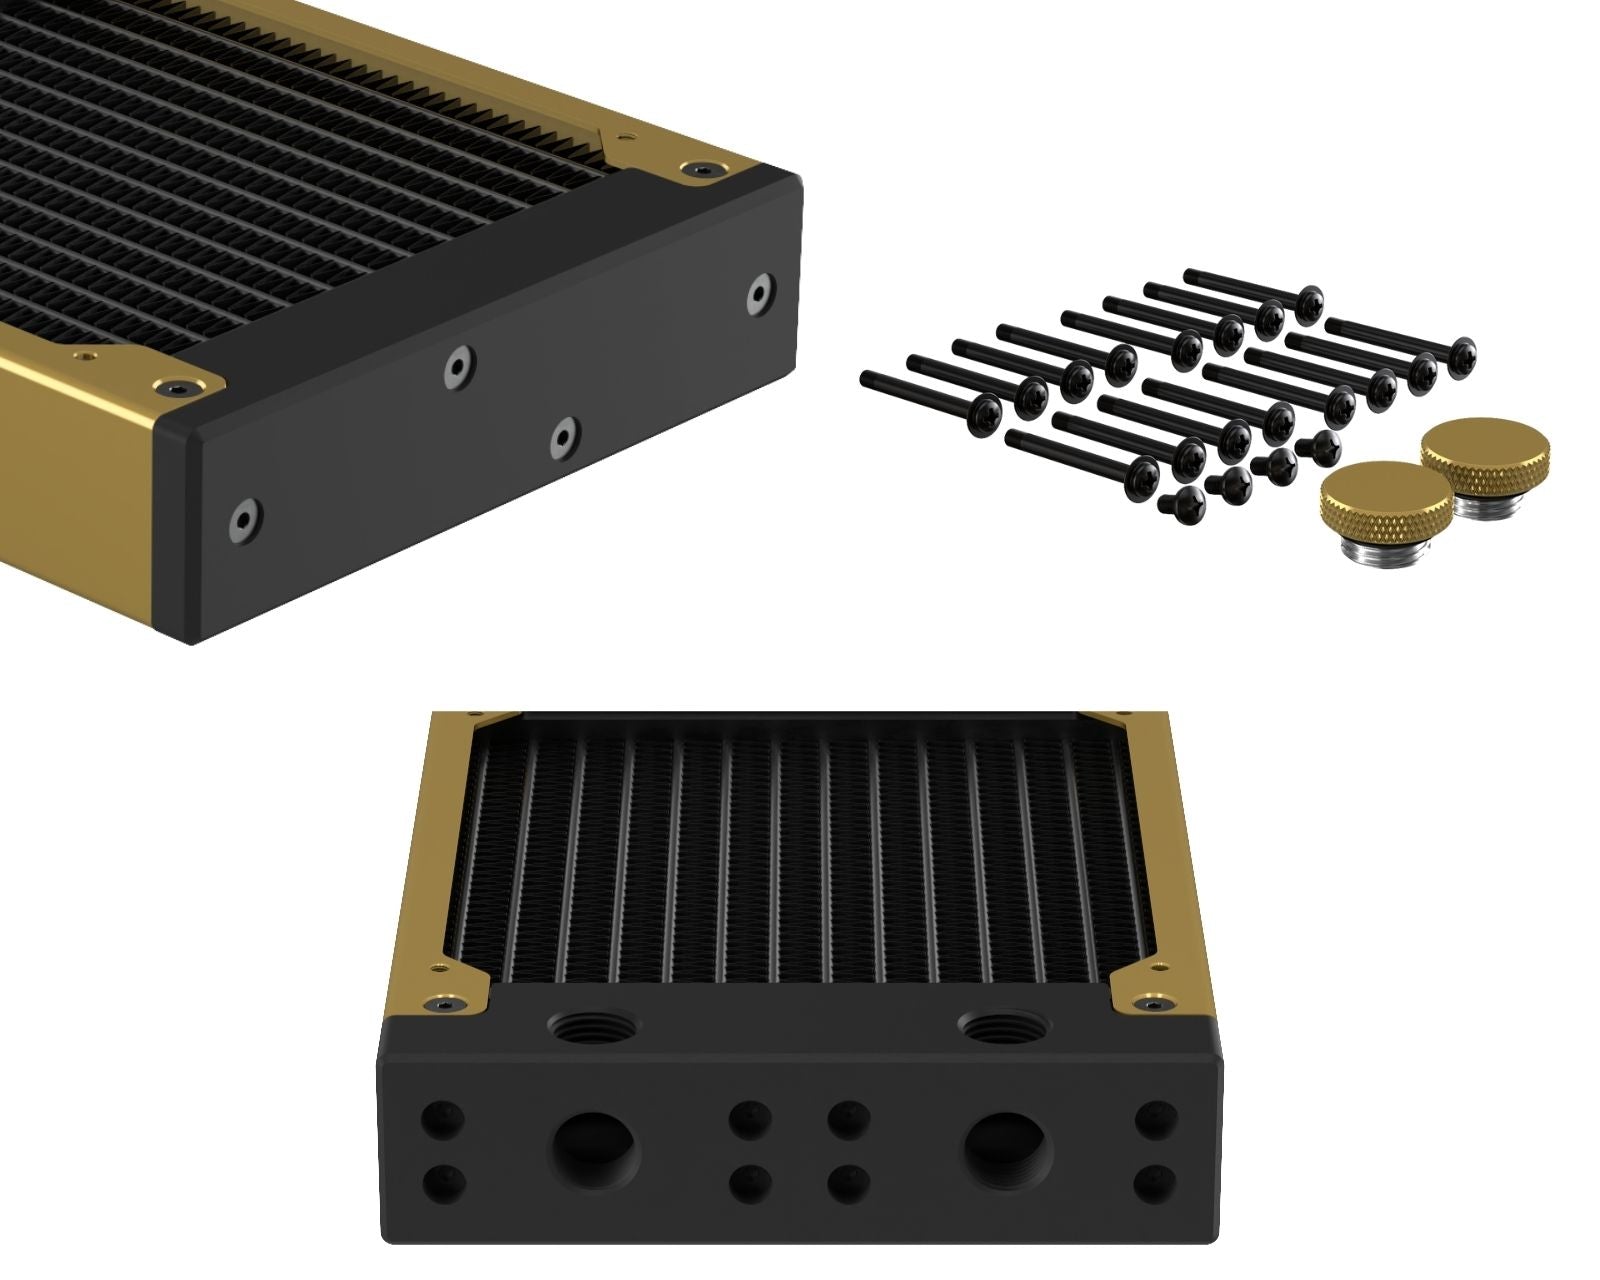 PrimoChill 480SL (30mm) EXIMO Modular Radiator, Black POM, 4x120mm, Quad Fan (R-SL-BK48) Available in 20+ Colors, Assembled in USA and Custom Watercooling Loop Ready - Candy Gold